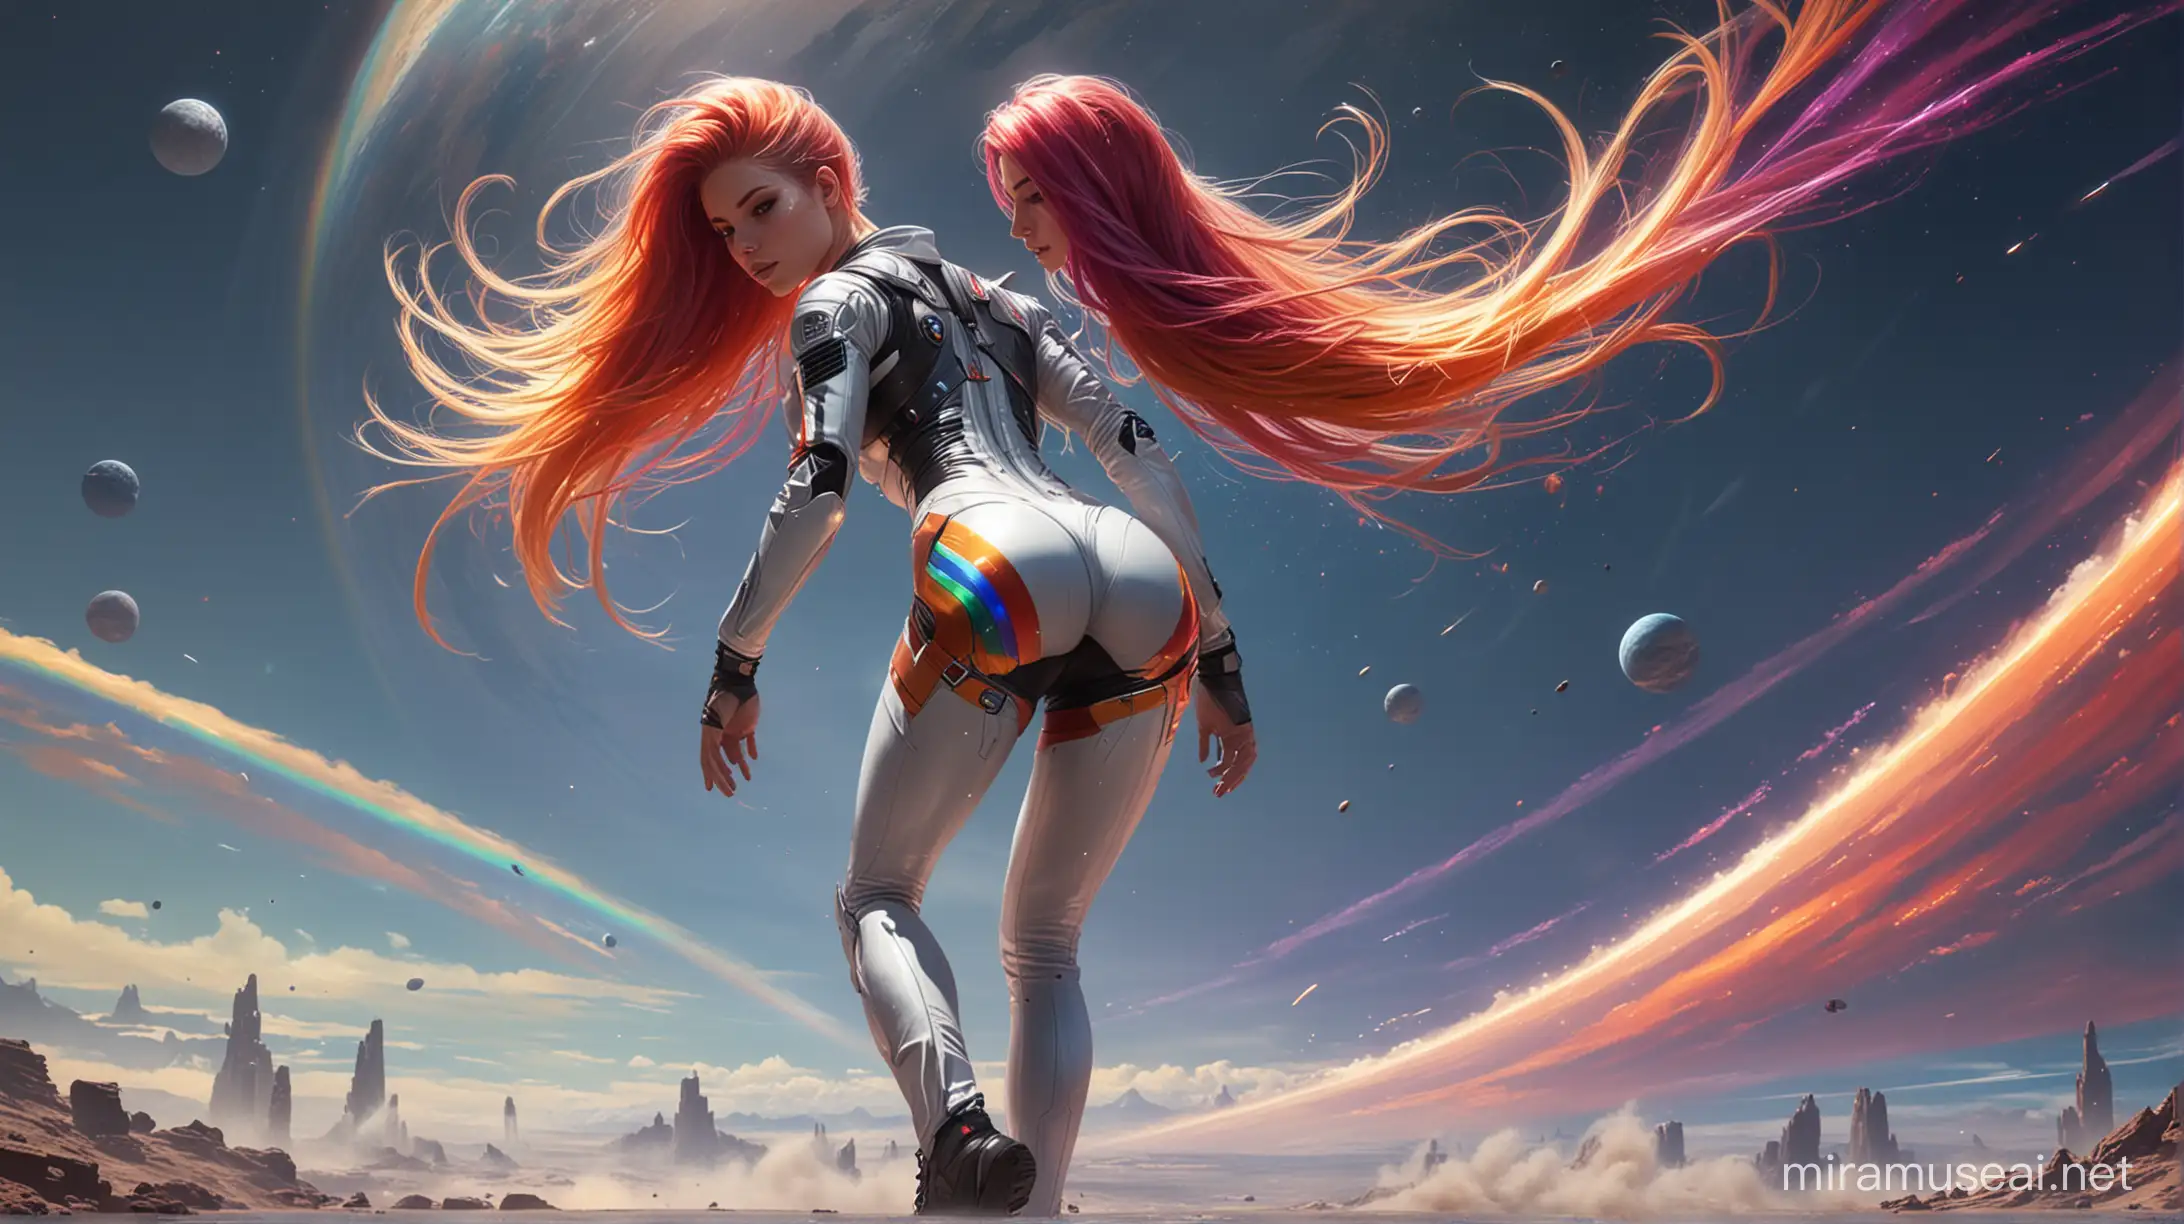 Athletic Girl in Futuristic Spacesuit with Rainbow Hair in Zero Gravity